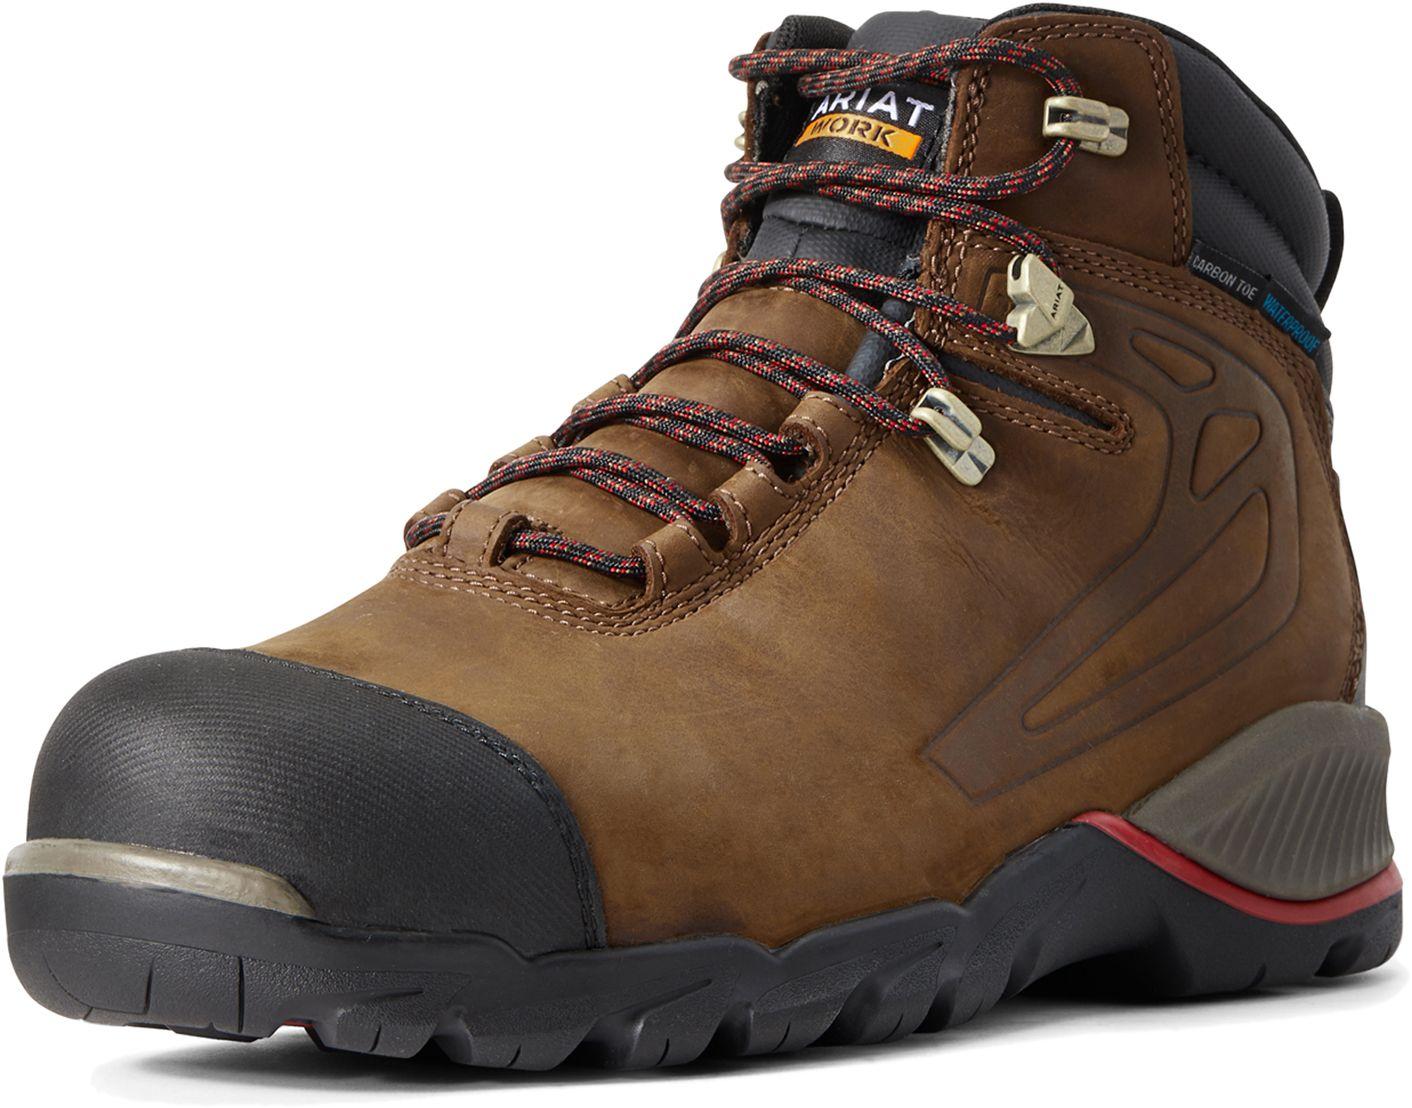 Ariat Rubber Rebar Off-road 6'' Waterproof Composite Toe Work Boots for ...